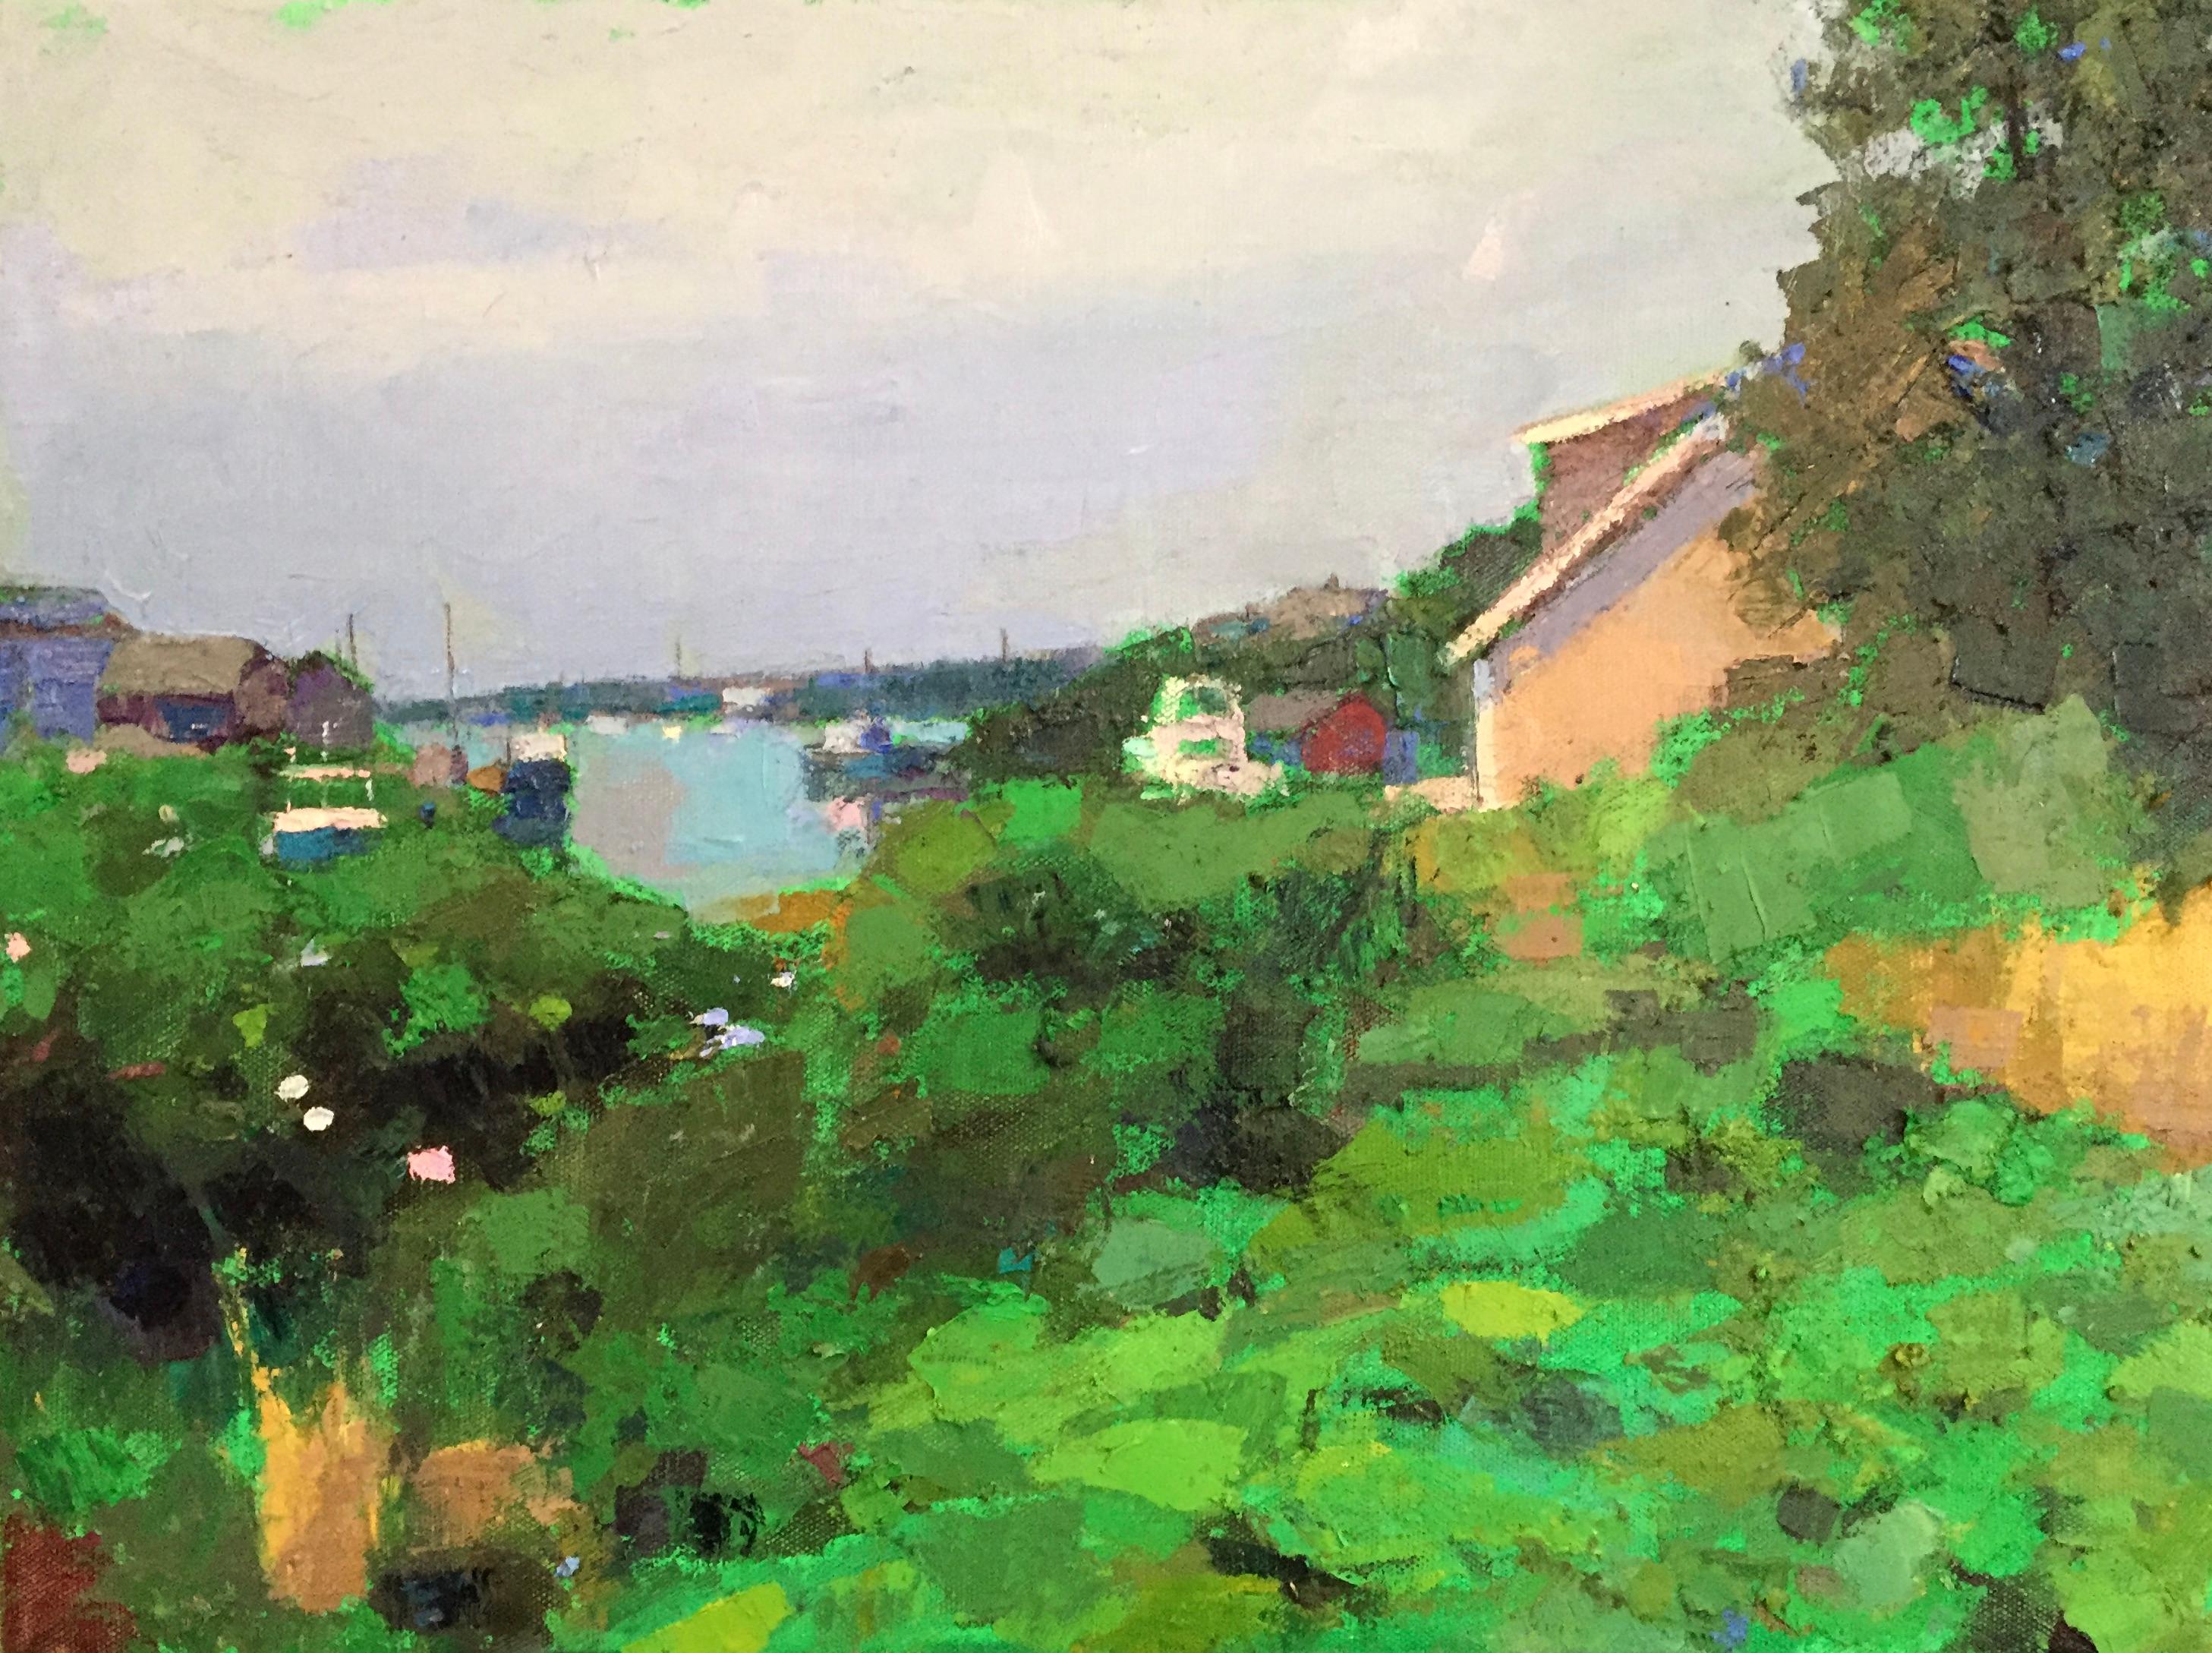 Larry Horowitz Landscape Painting - "Fishing Village" oil painting of Menemsha with bright green foreground